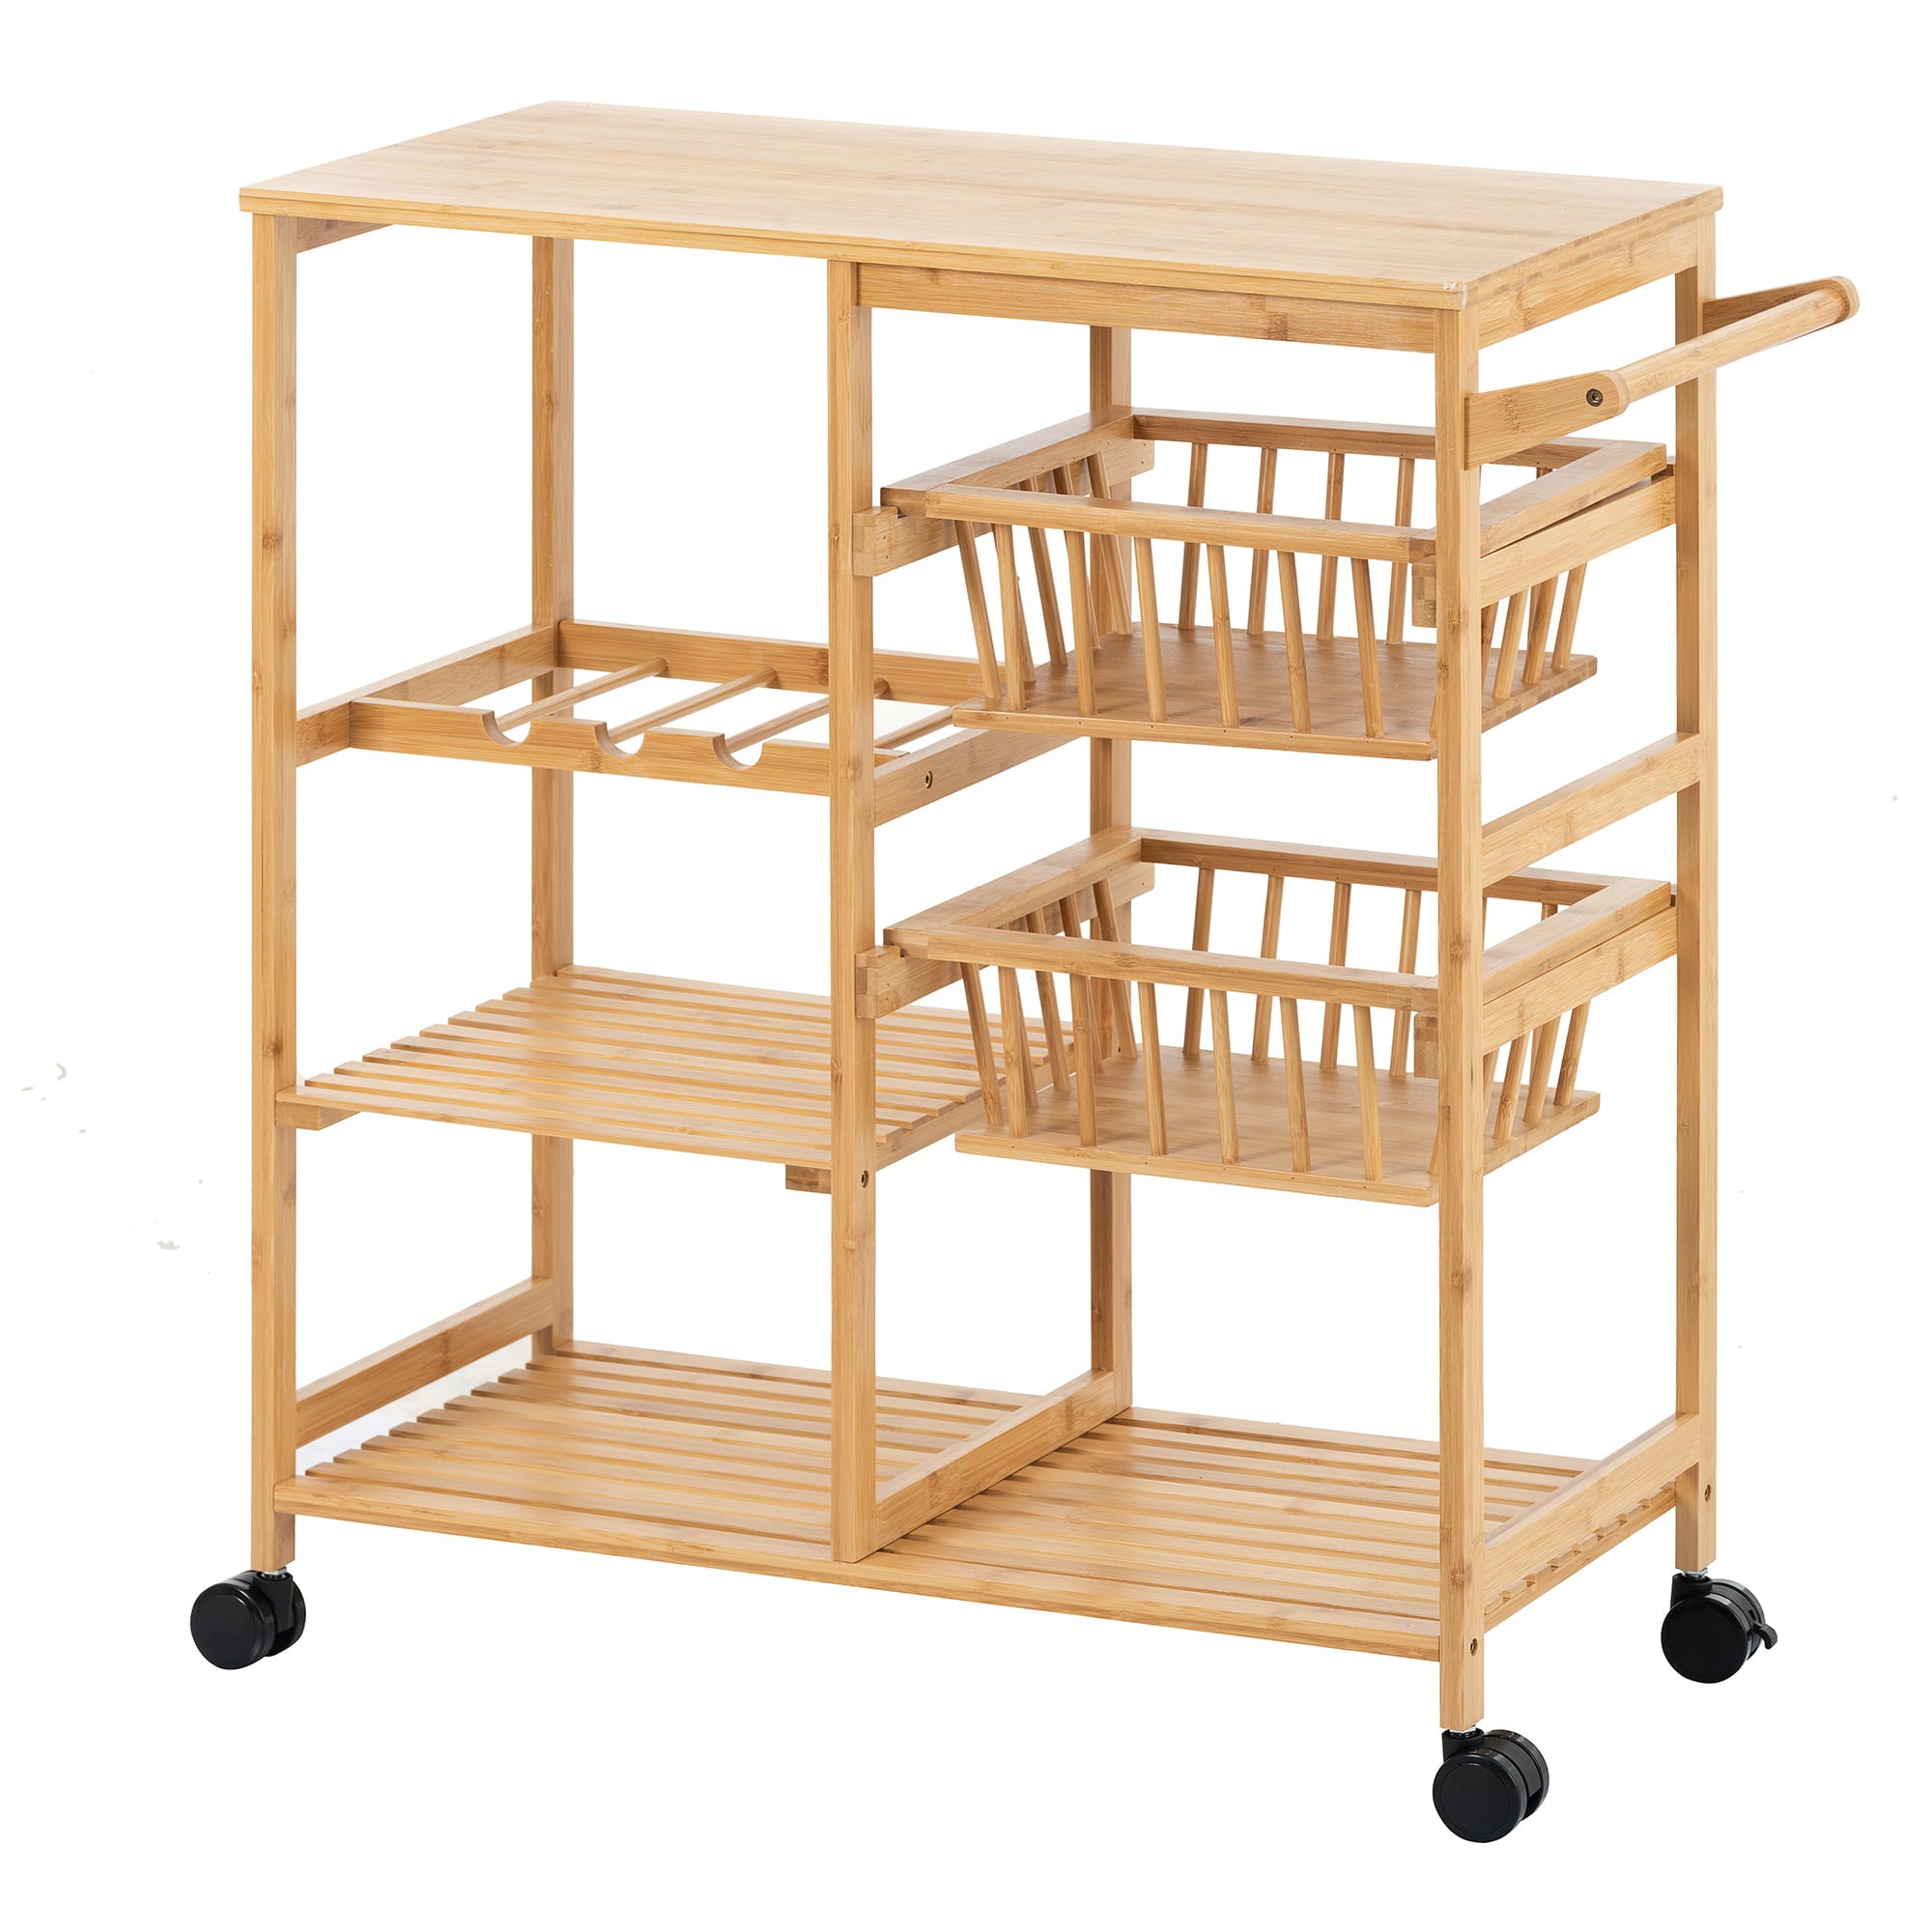 Bamboo Dining Cart， Kitchen Island Cart with Wood Tabletop， 4-Tier Rolling Storage Cart on Wheels， with Open Shelves and Basket Drawers for Home， Dining Room， Office， Restaurant， Hotel， L0485